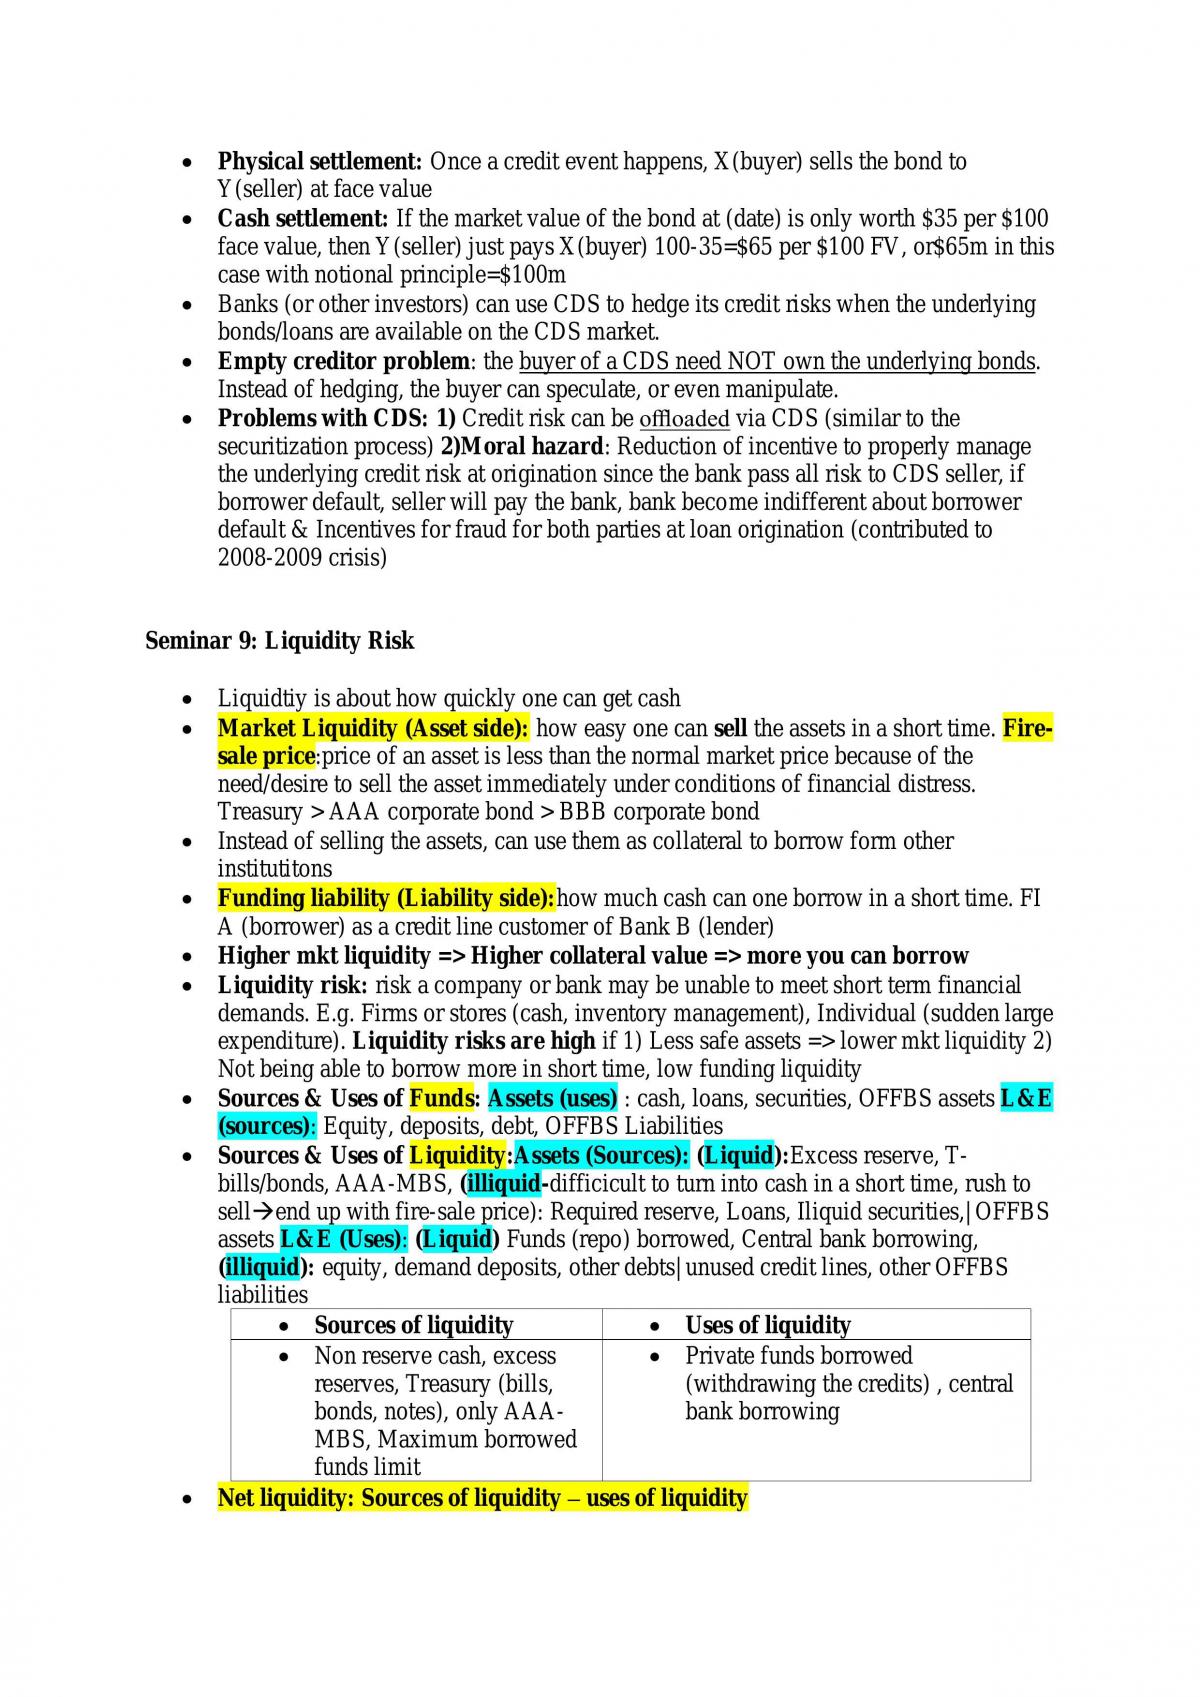 Risk Management and Financial Institutions Study notes - Page 26